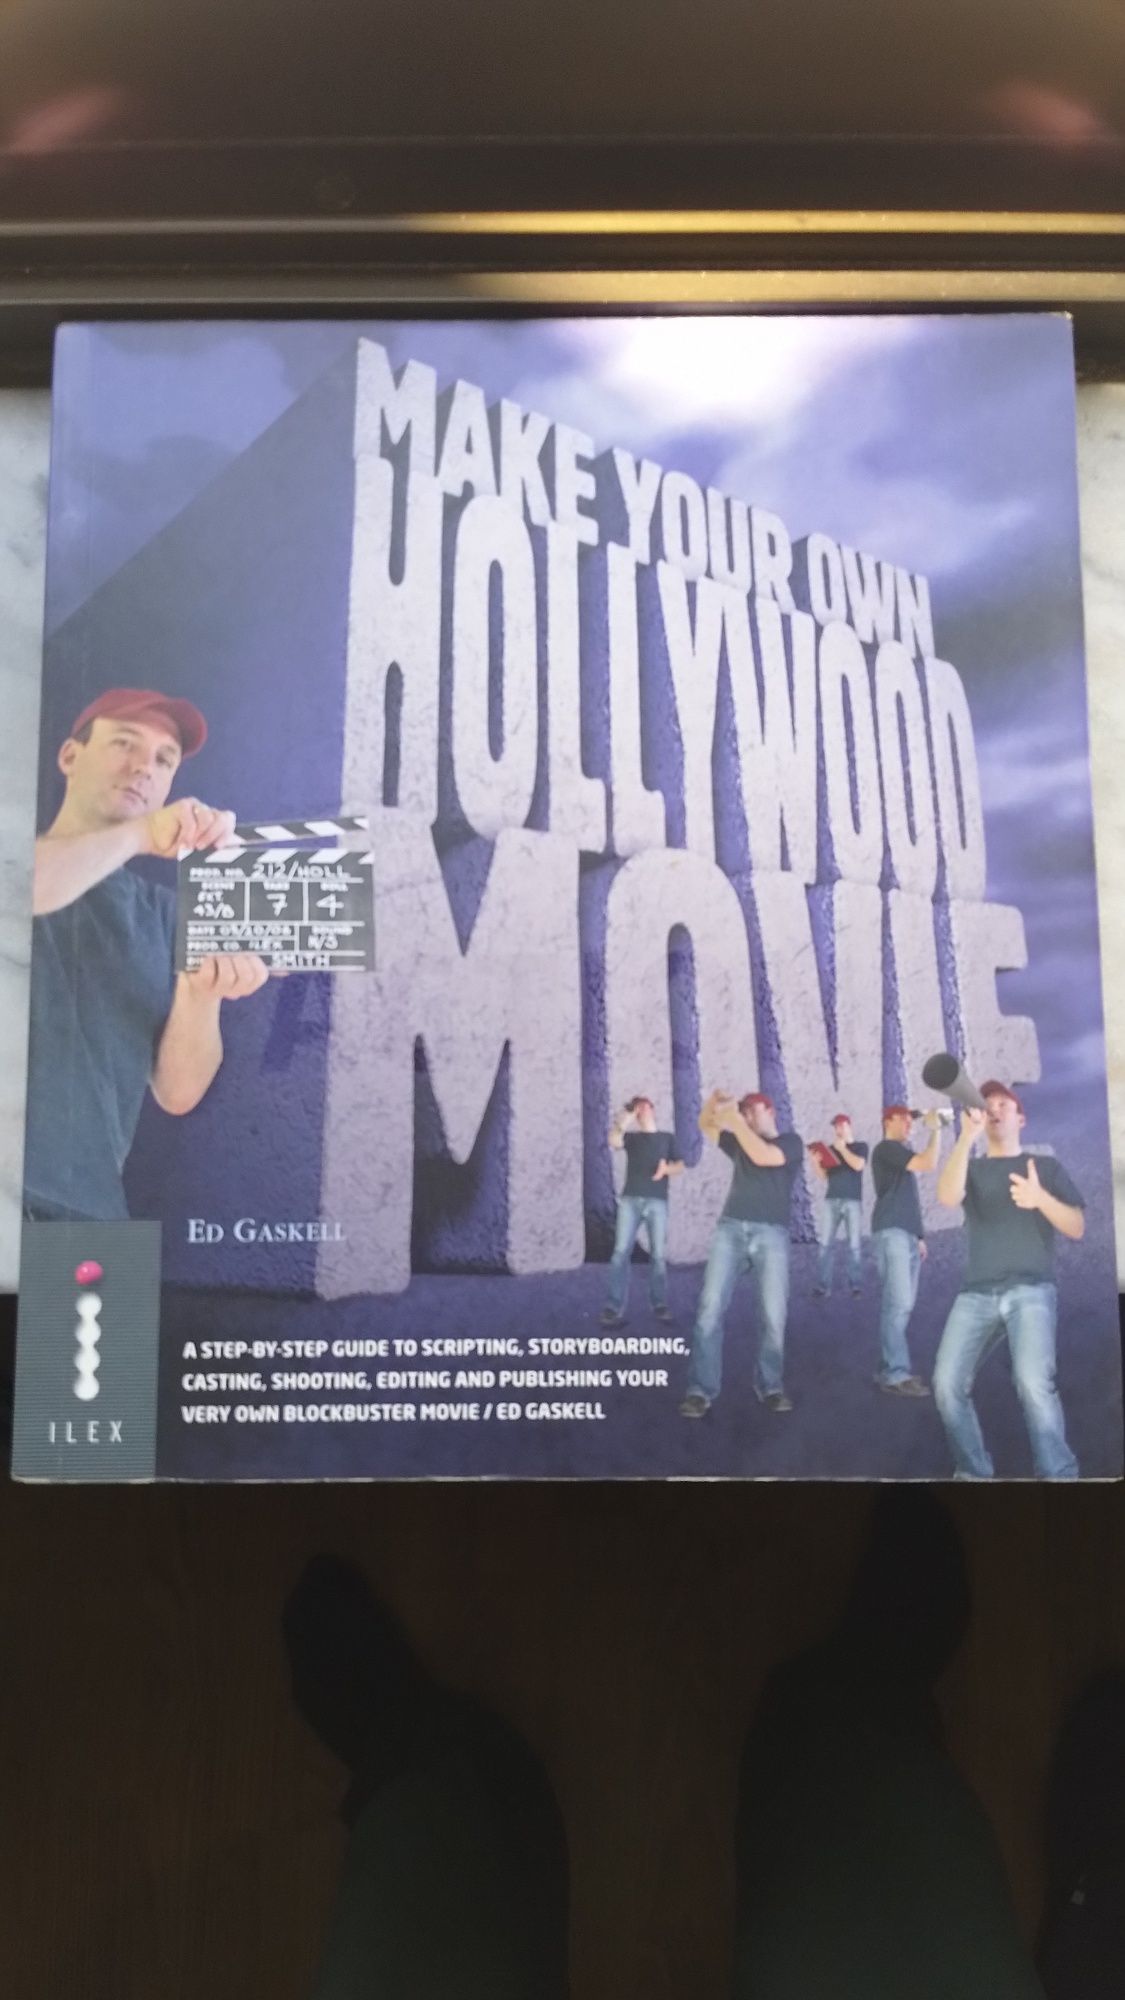 LIVRO Make your own Hollywood Movie